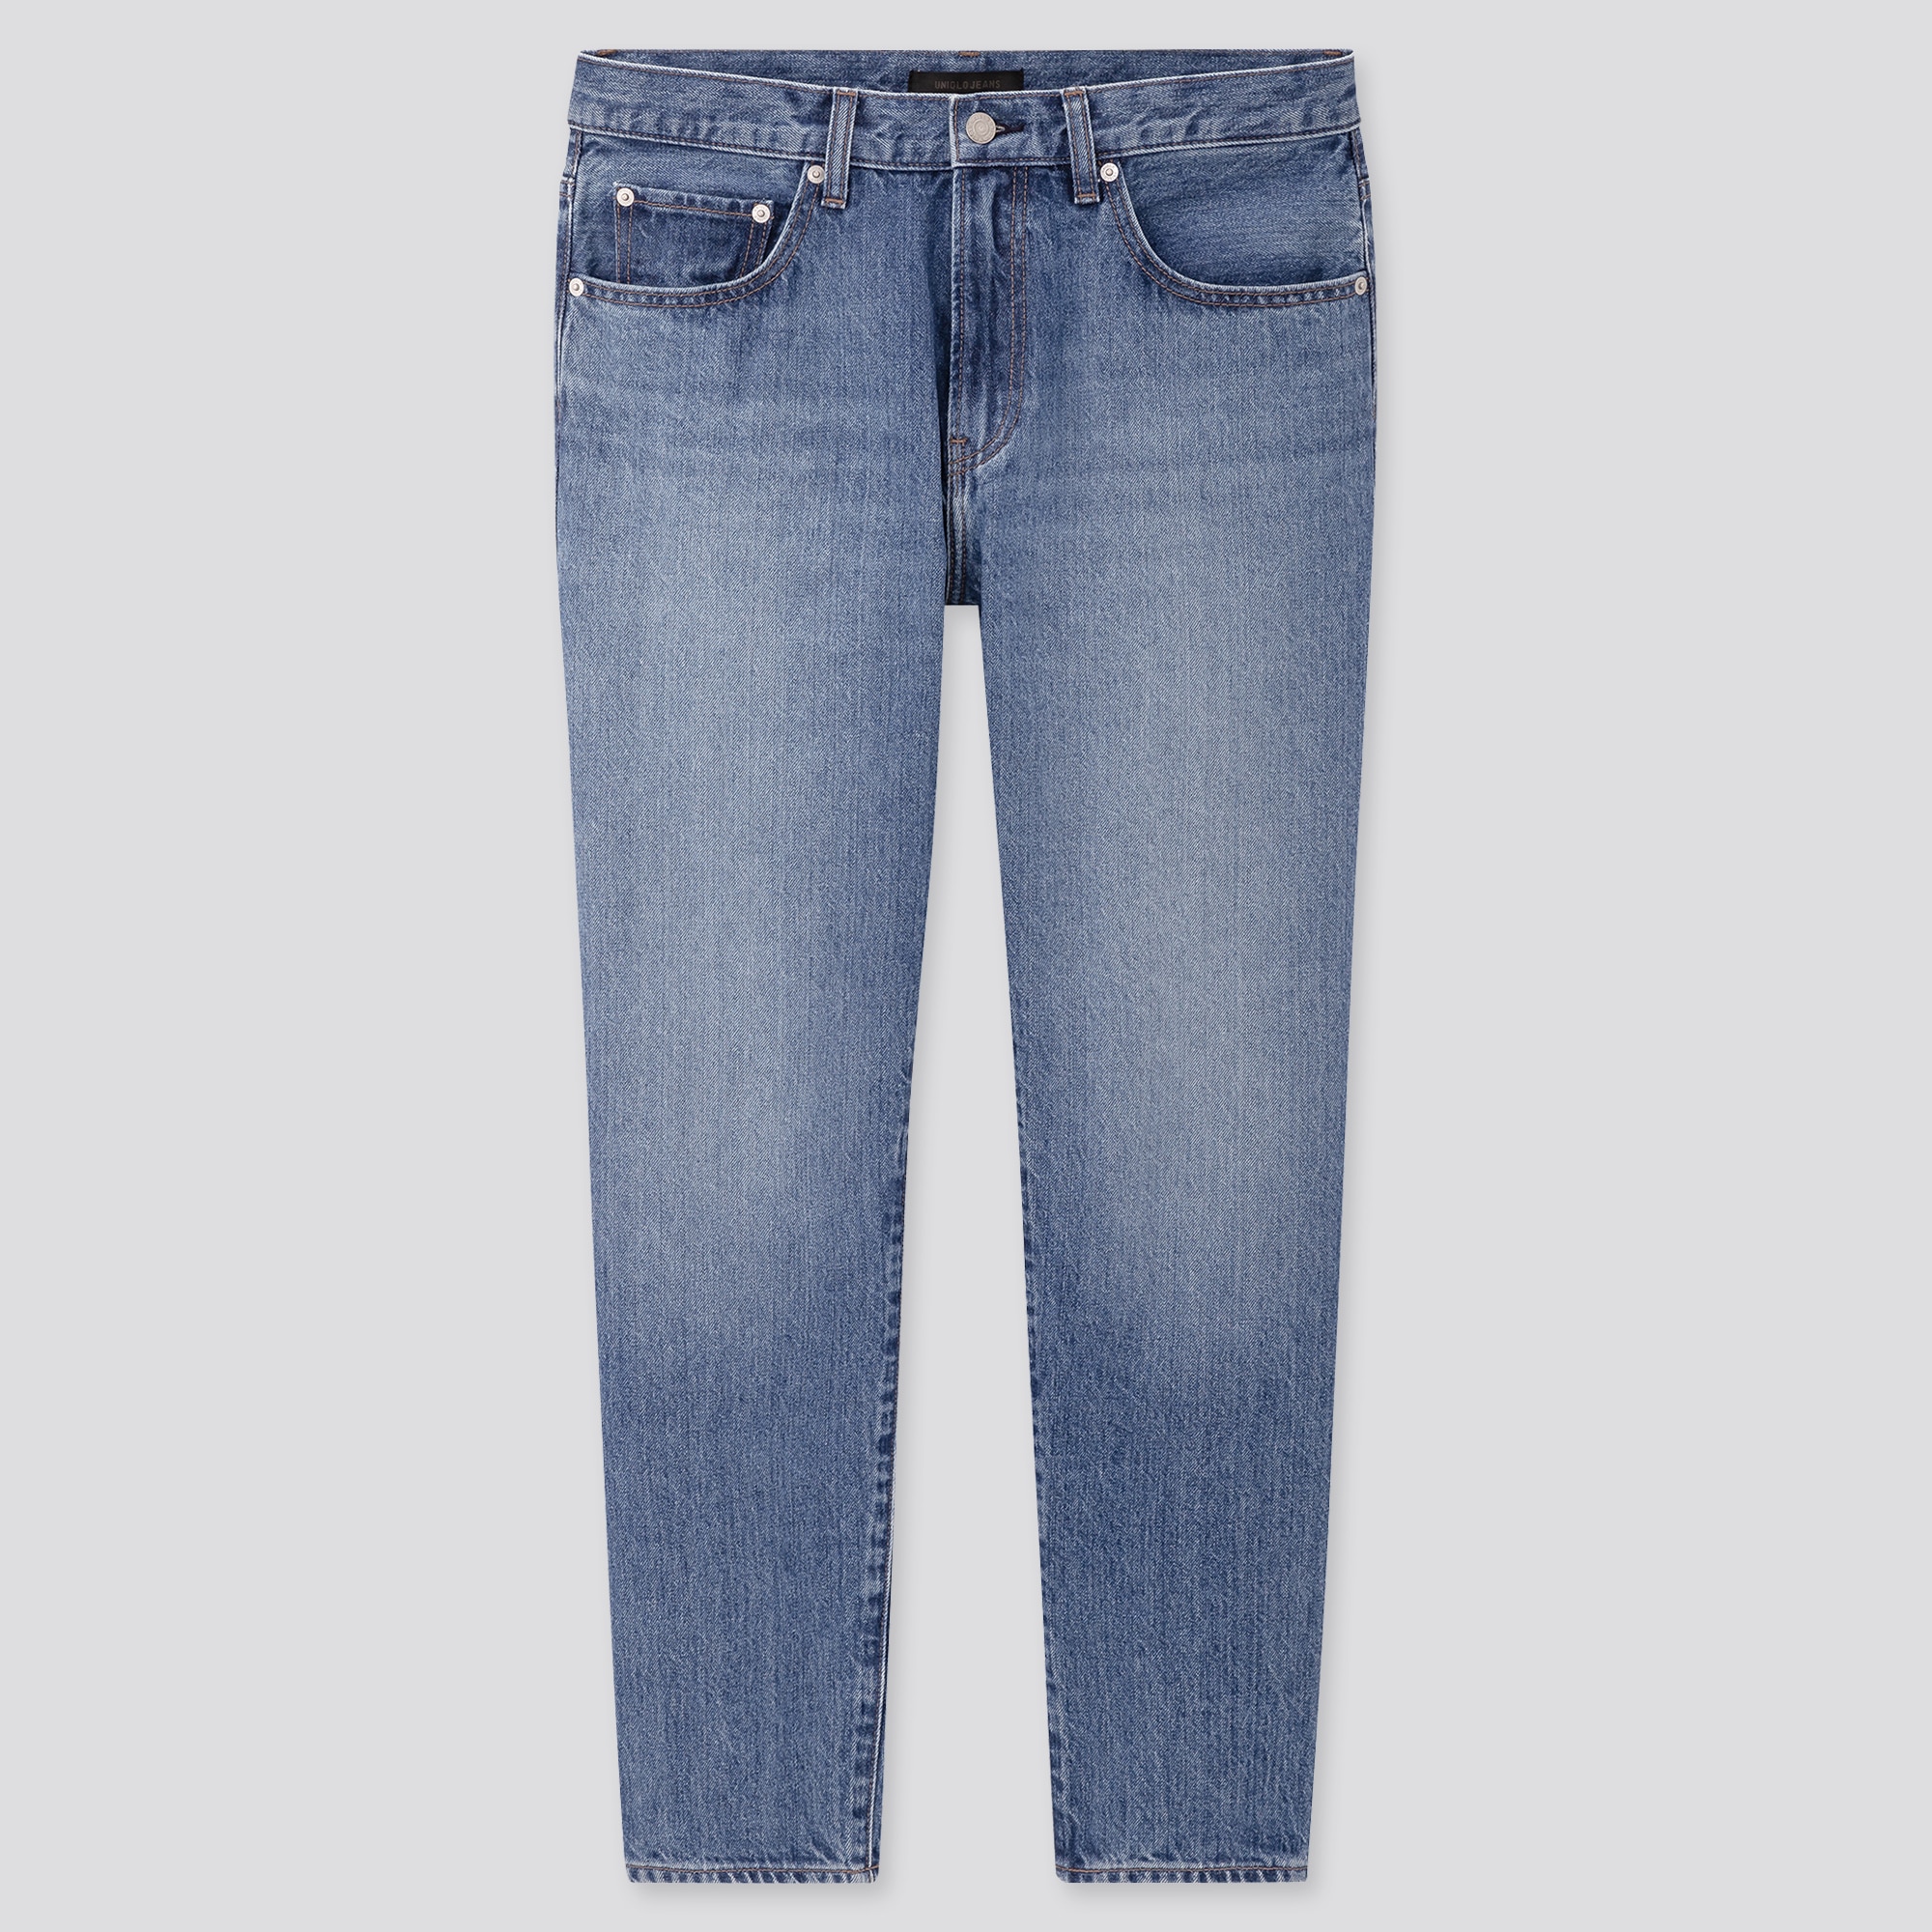 uniqlo tapered jeans